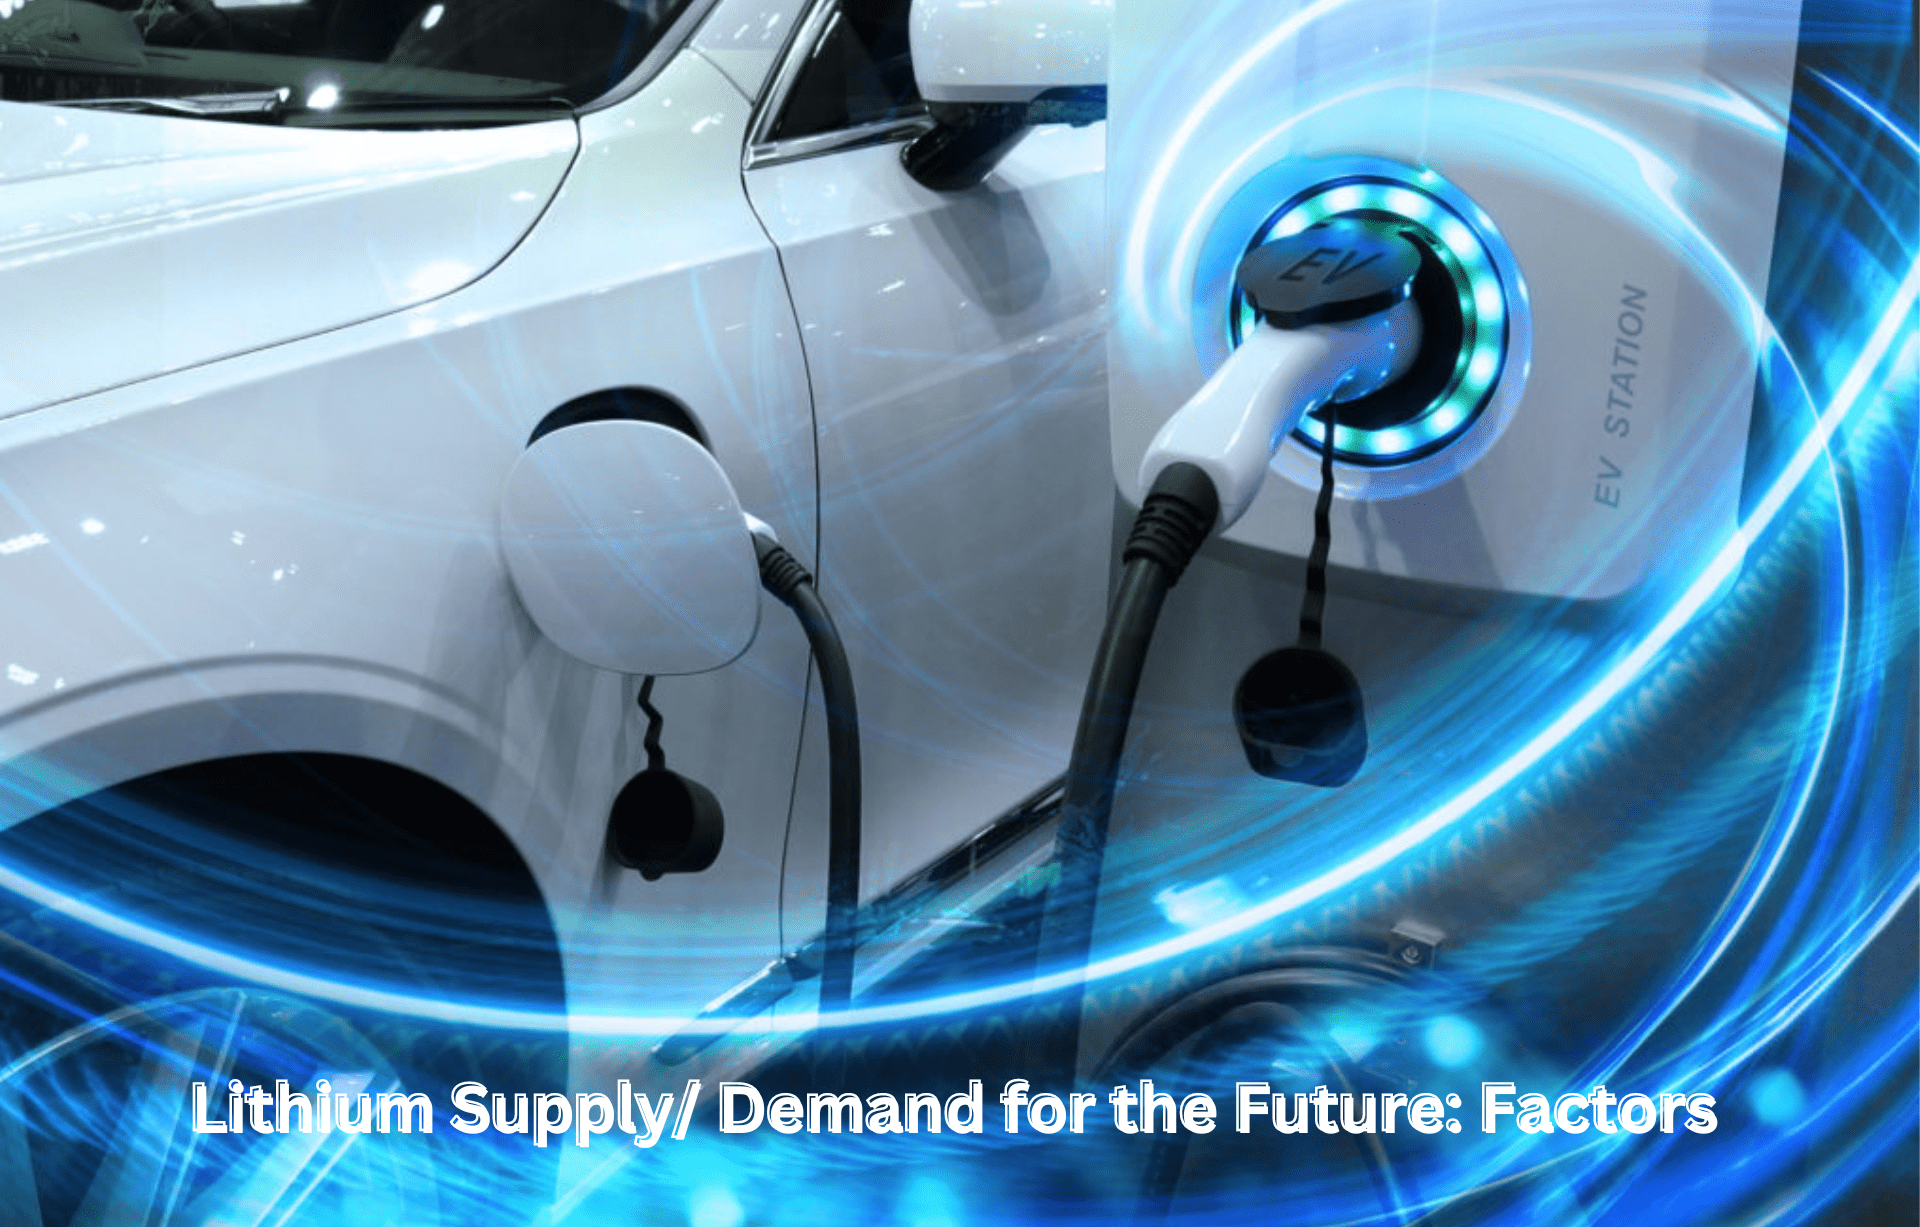 Lithium Supply/ Demand for the Future: Factors